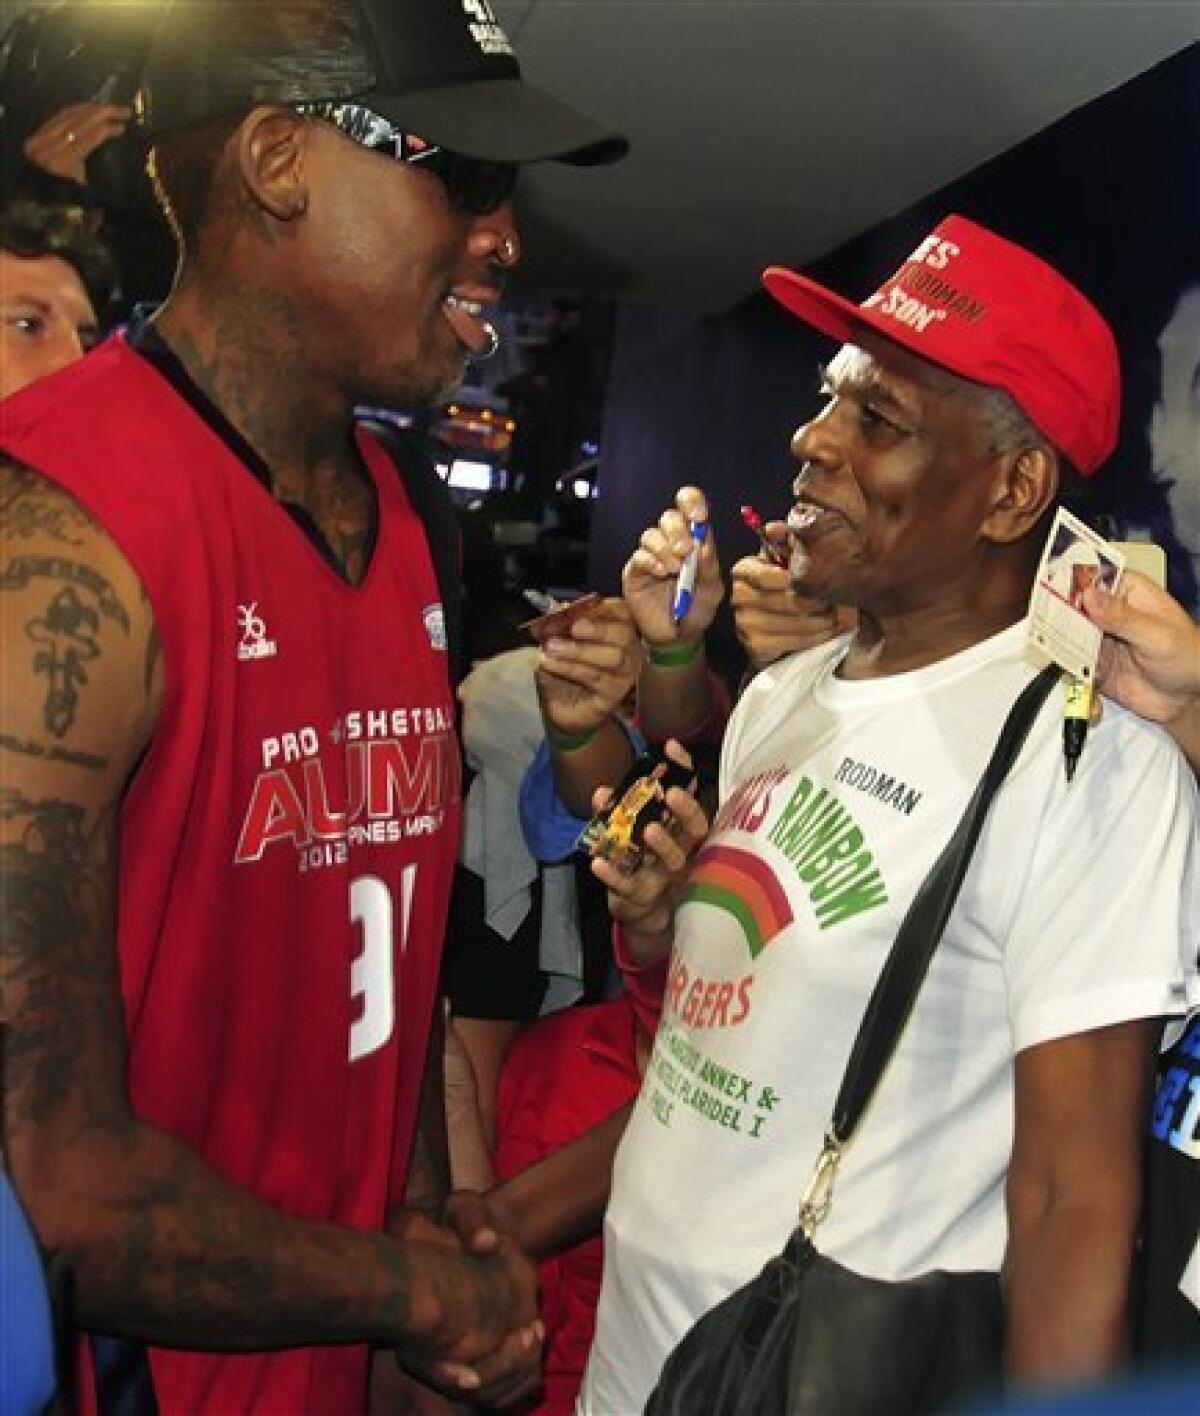 How Many Kids Does Dennis Rodman Have?